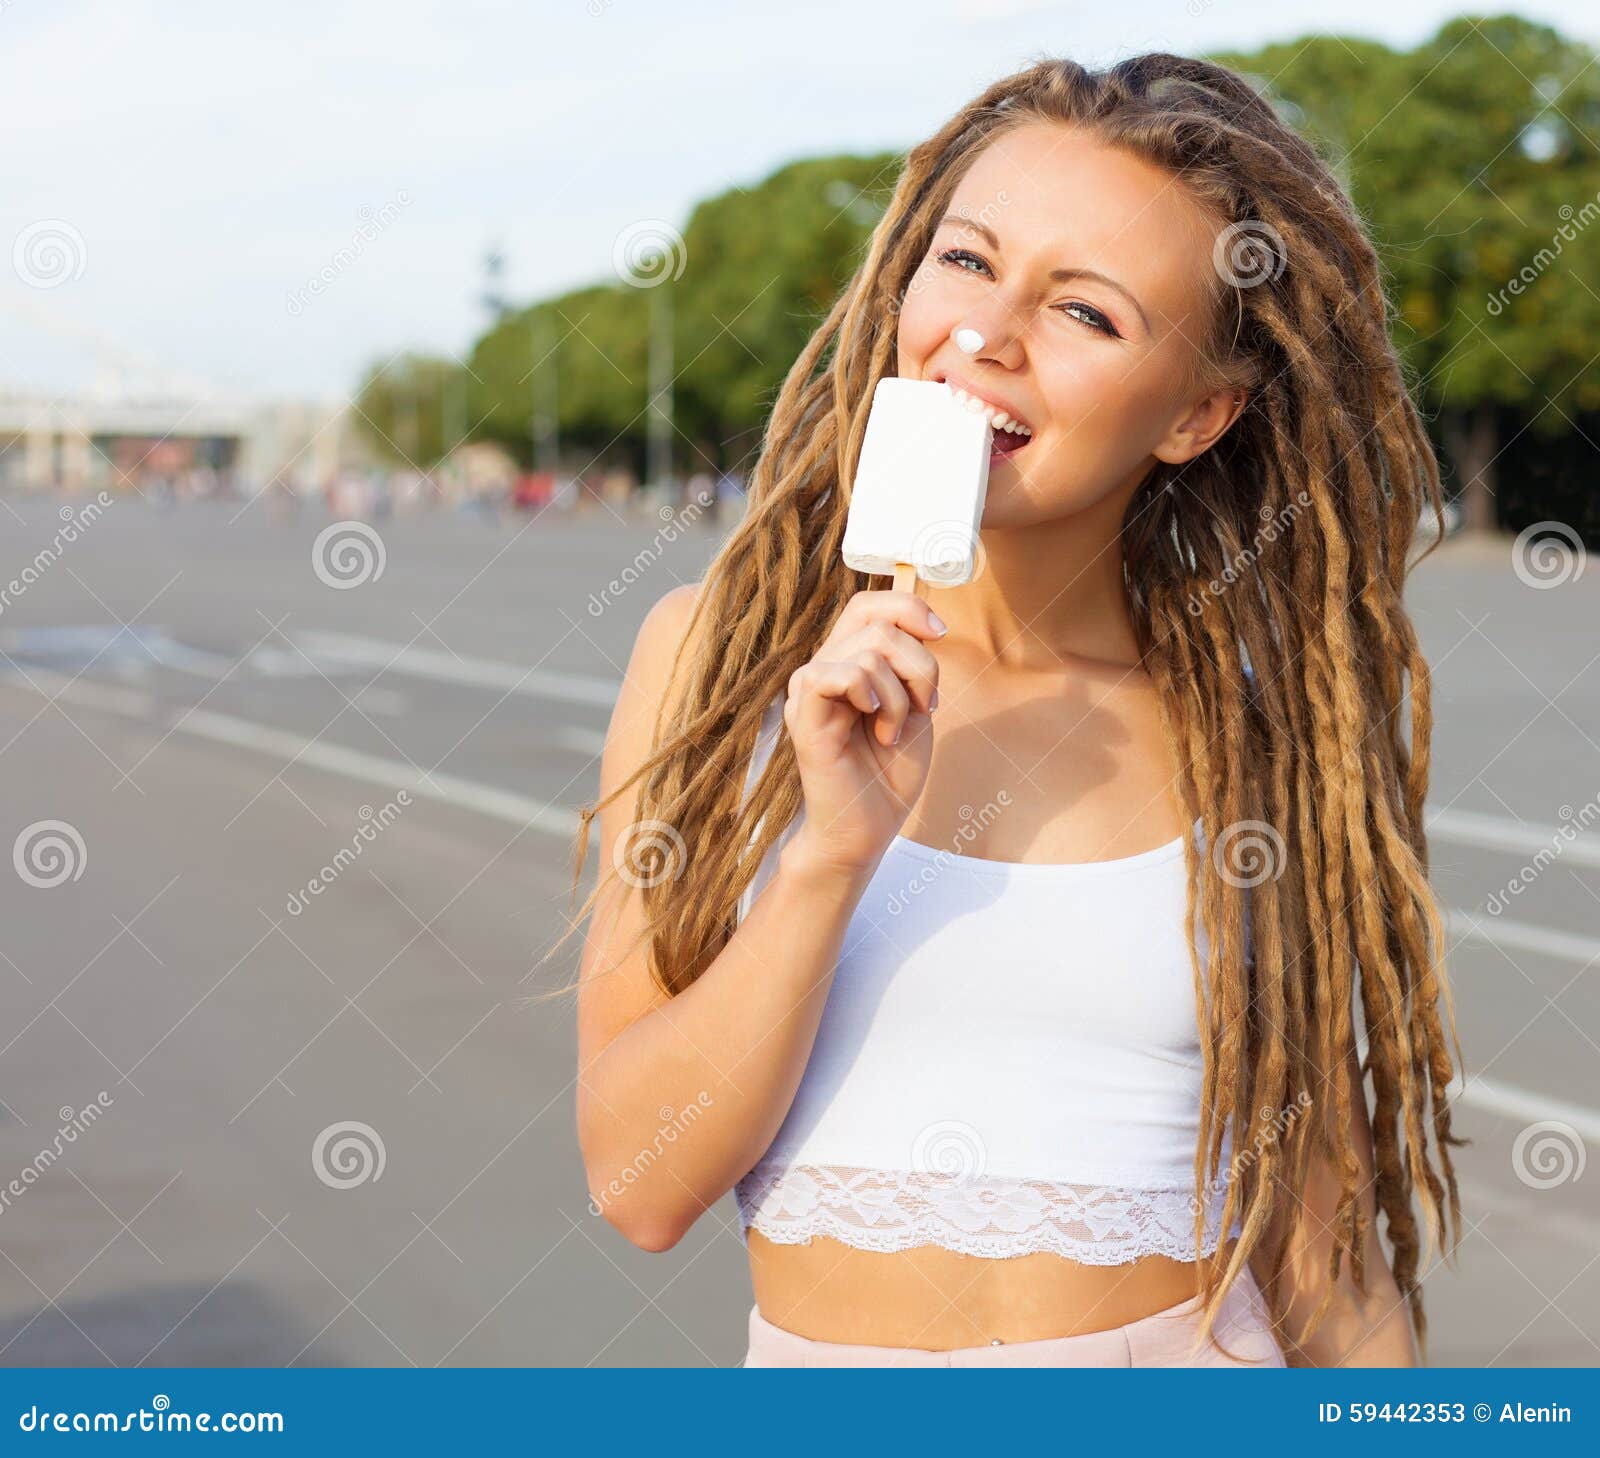 Young Blonde Girl With Dreads Eating White Ice Cream In